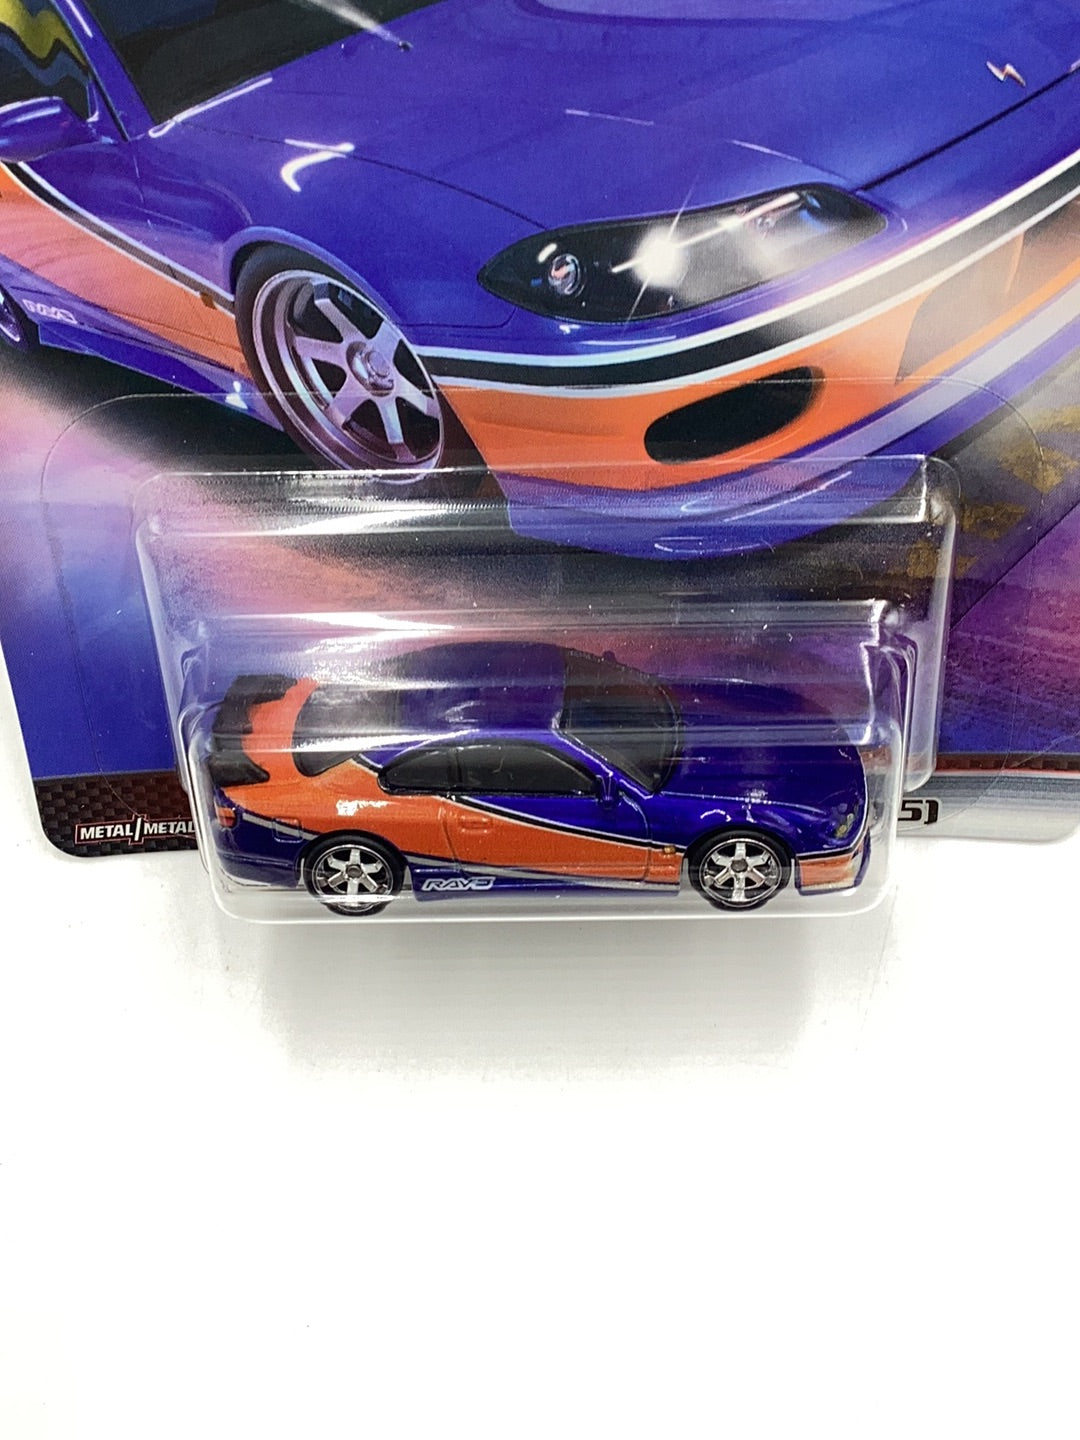 Hot Wheels premium fast and furious Fast Imports #2 Nissan Silvia (S15)